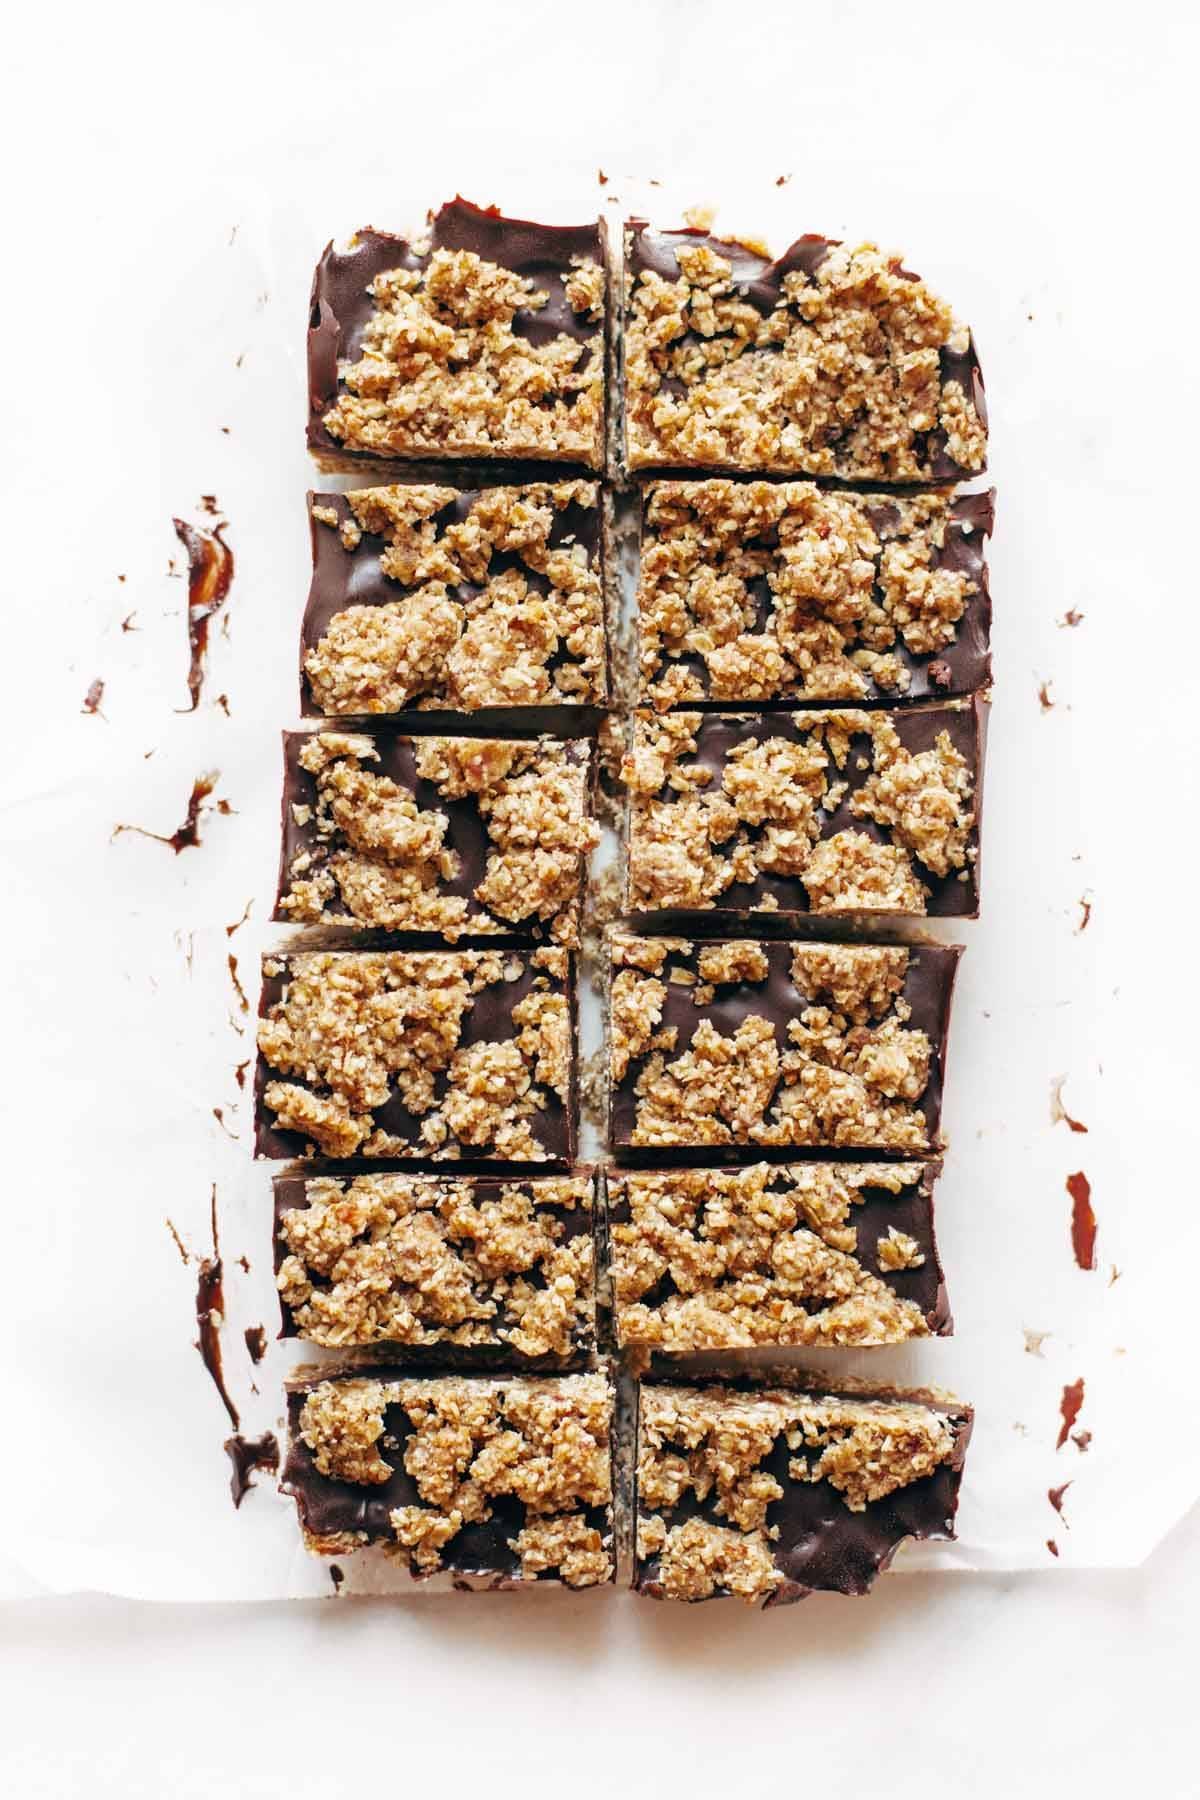 Chocolate snack bars on parchment paper.